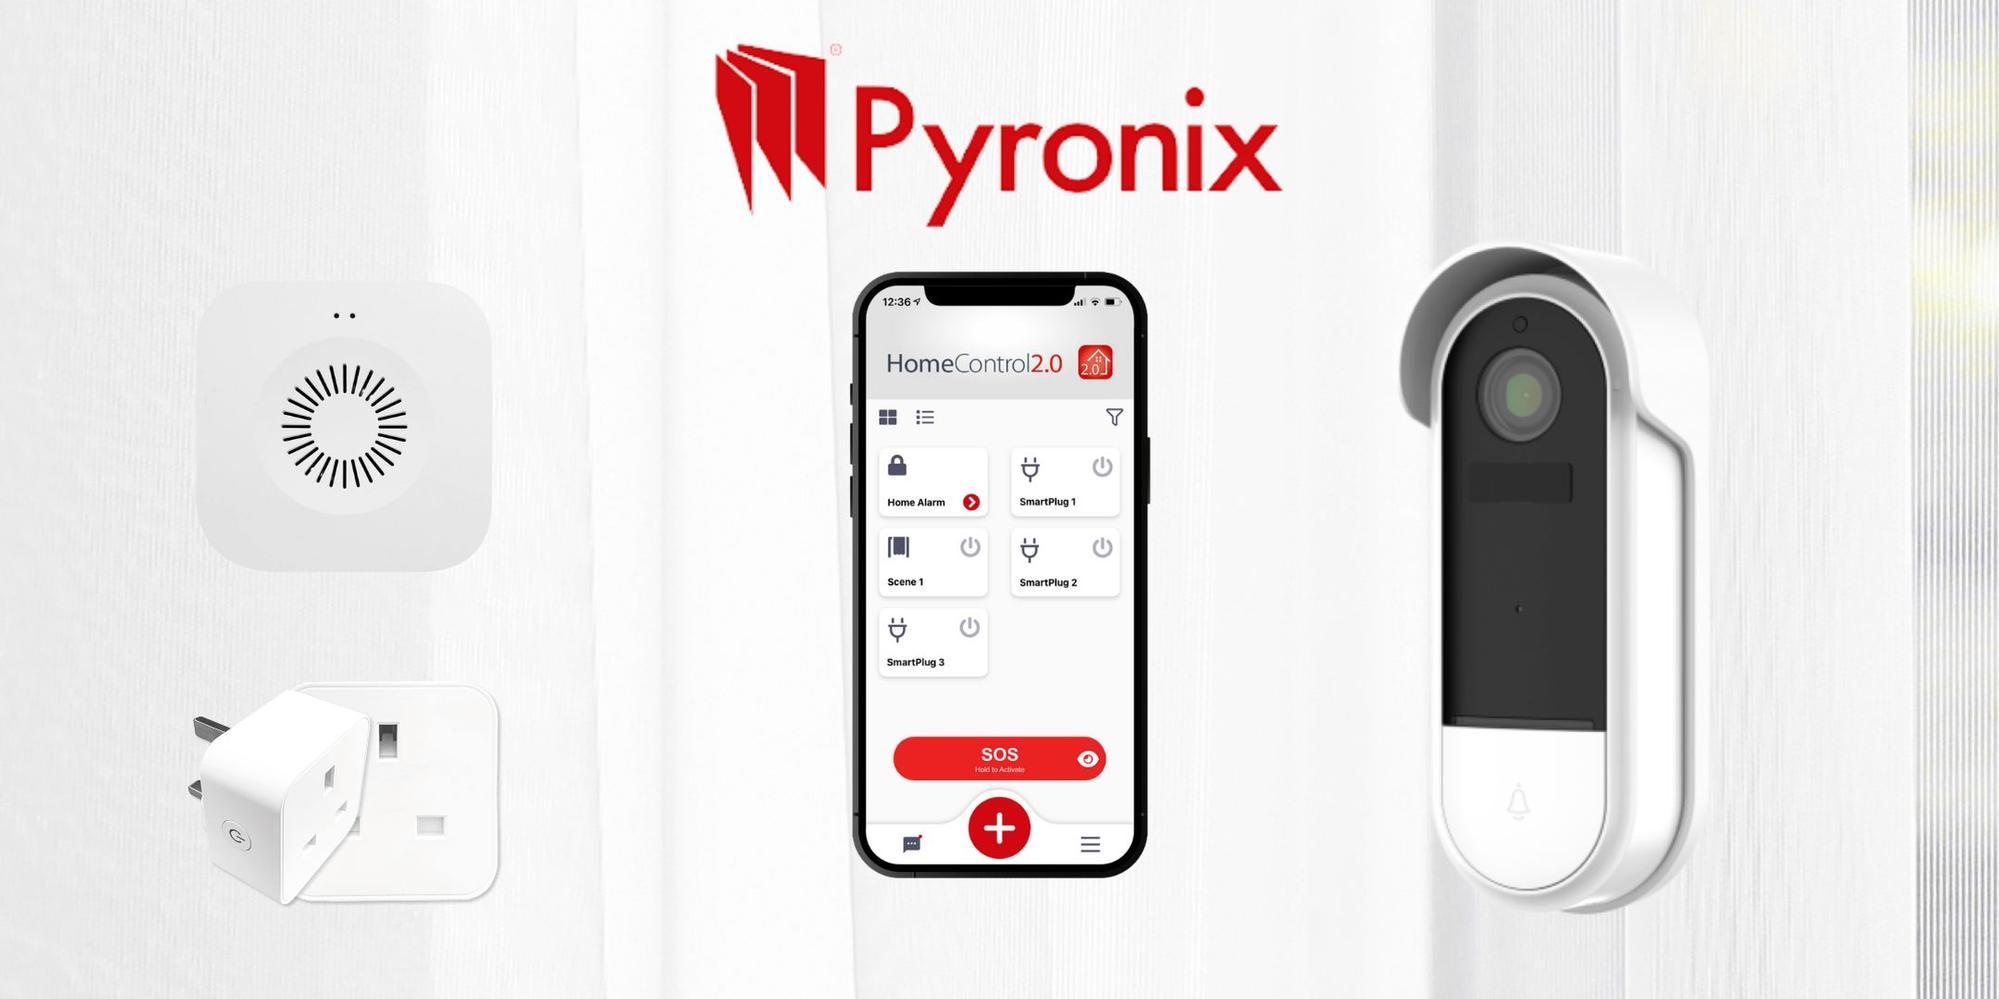 Pyronix announces new smart home products and adds new features to its HomeControl2.0 app